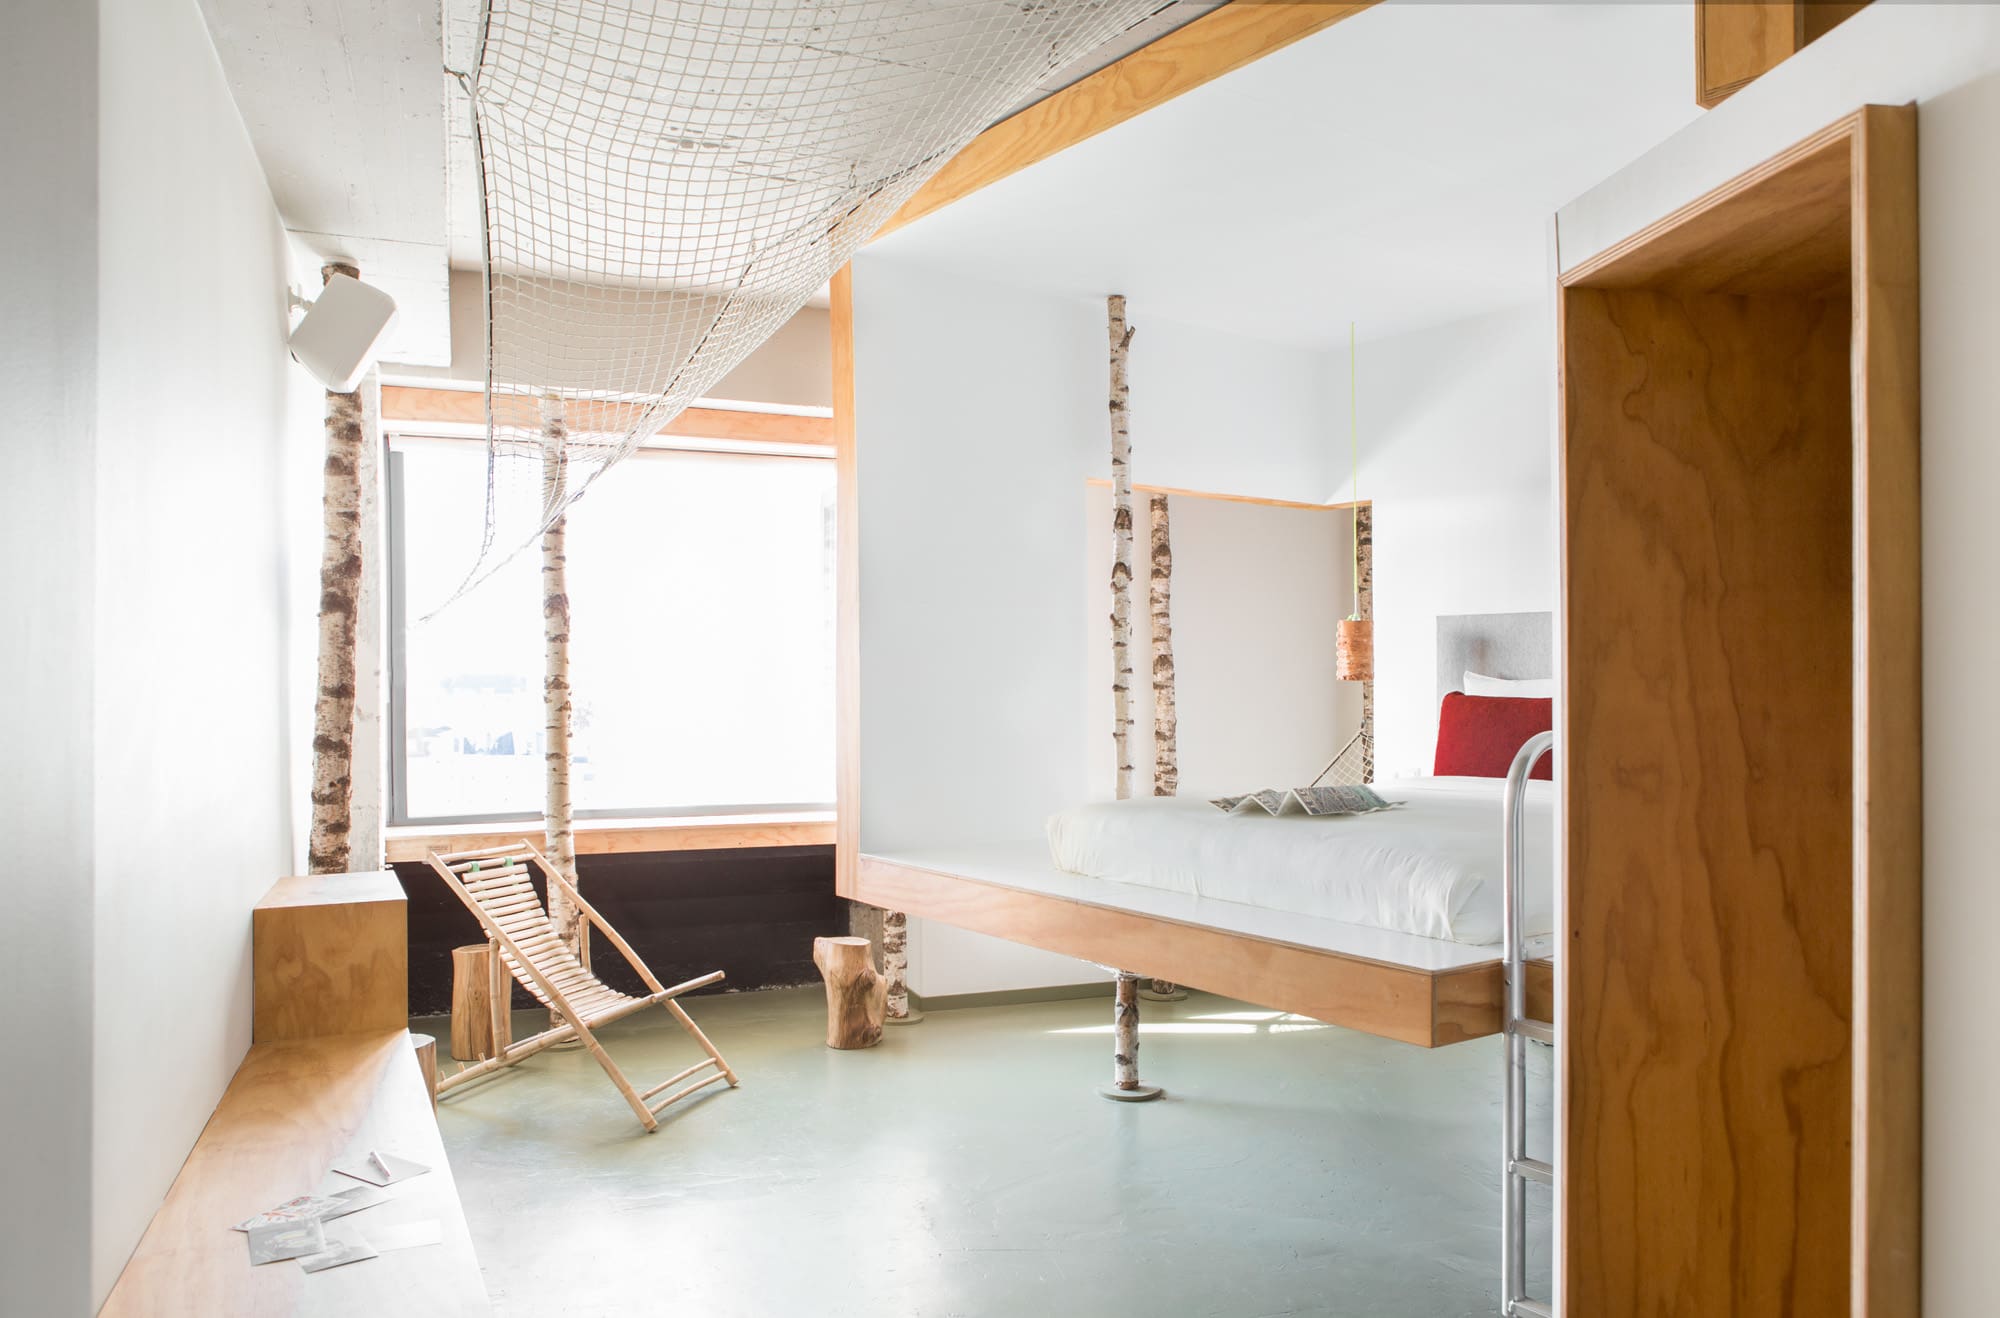 The best hotels in Amsterdam | Lofted bed in a light wood and white room at the Volkshotel.